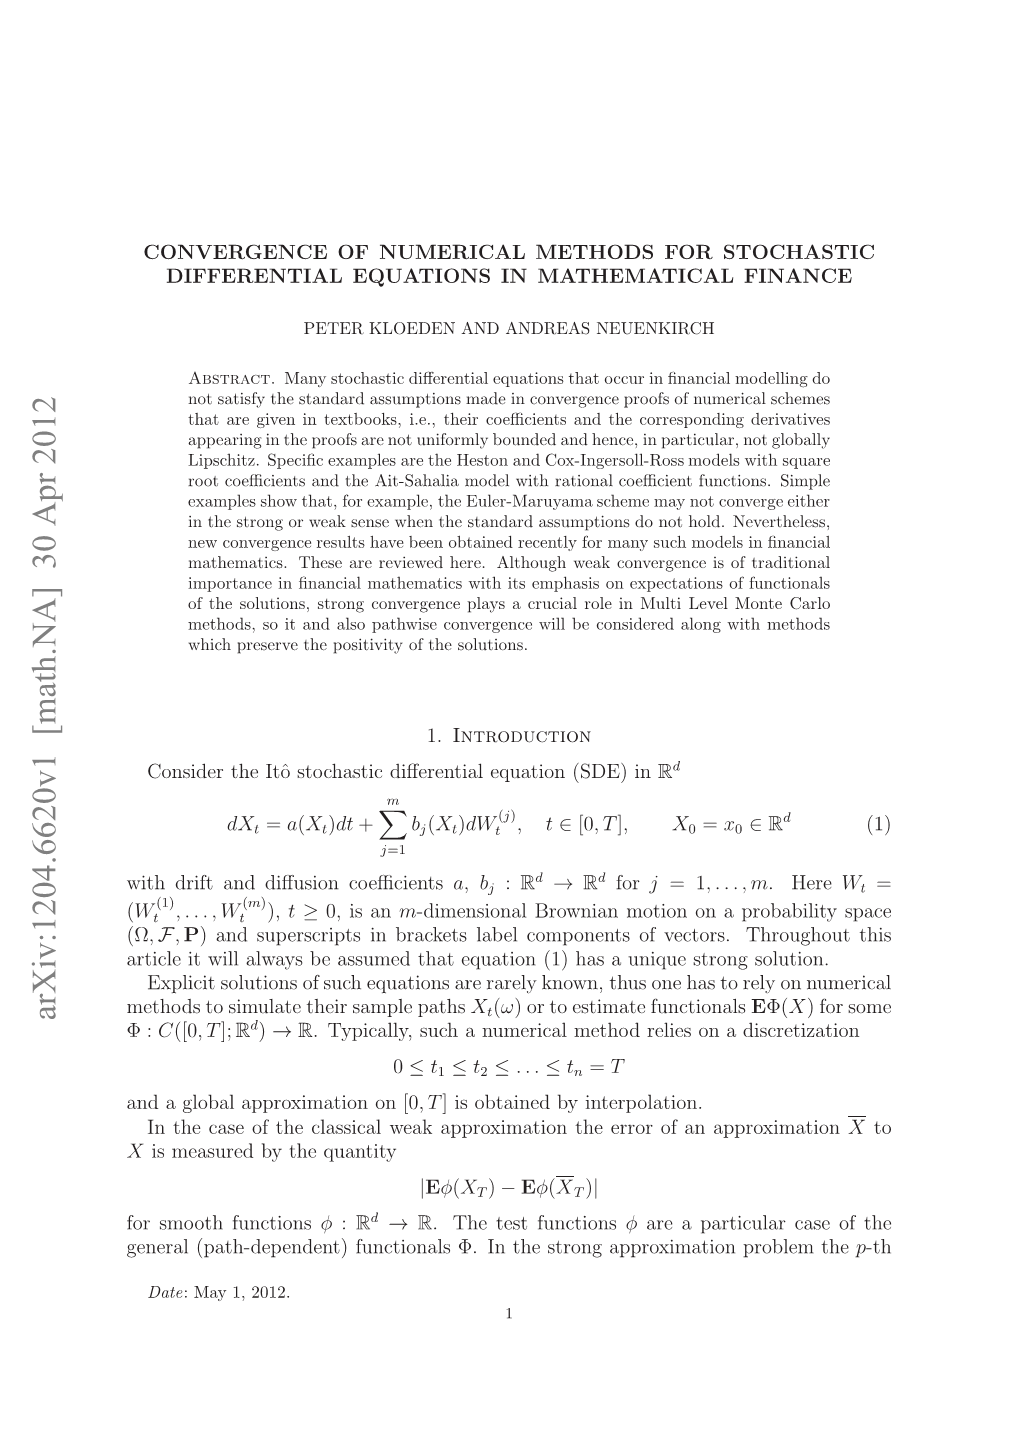 Arxiv:1204.6620V1 [Math.NA] 30 Apr 2012 O Mohfunctions Smooth for Eea Pt-Eedn)Fntoasφ Ntesrn Approx Strong the in Φ